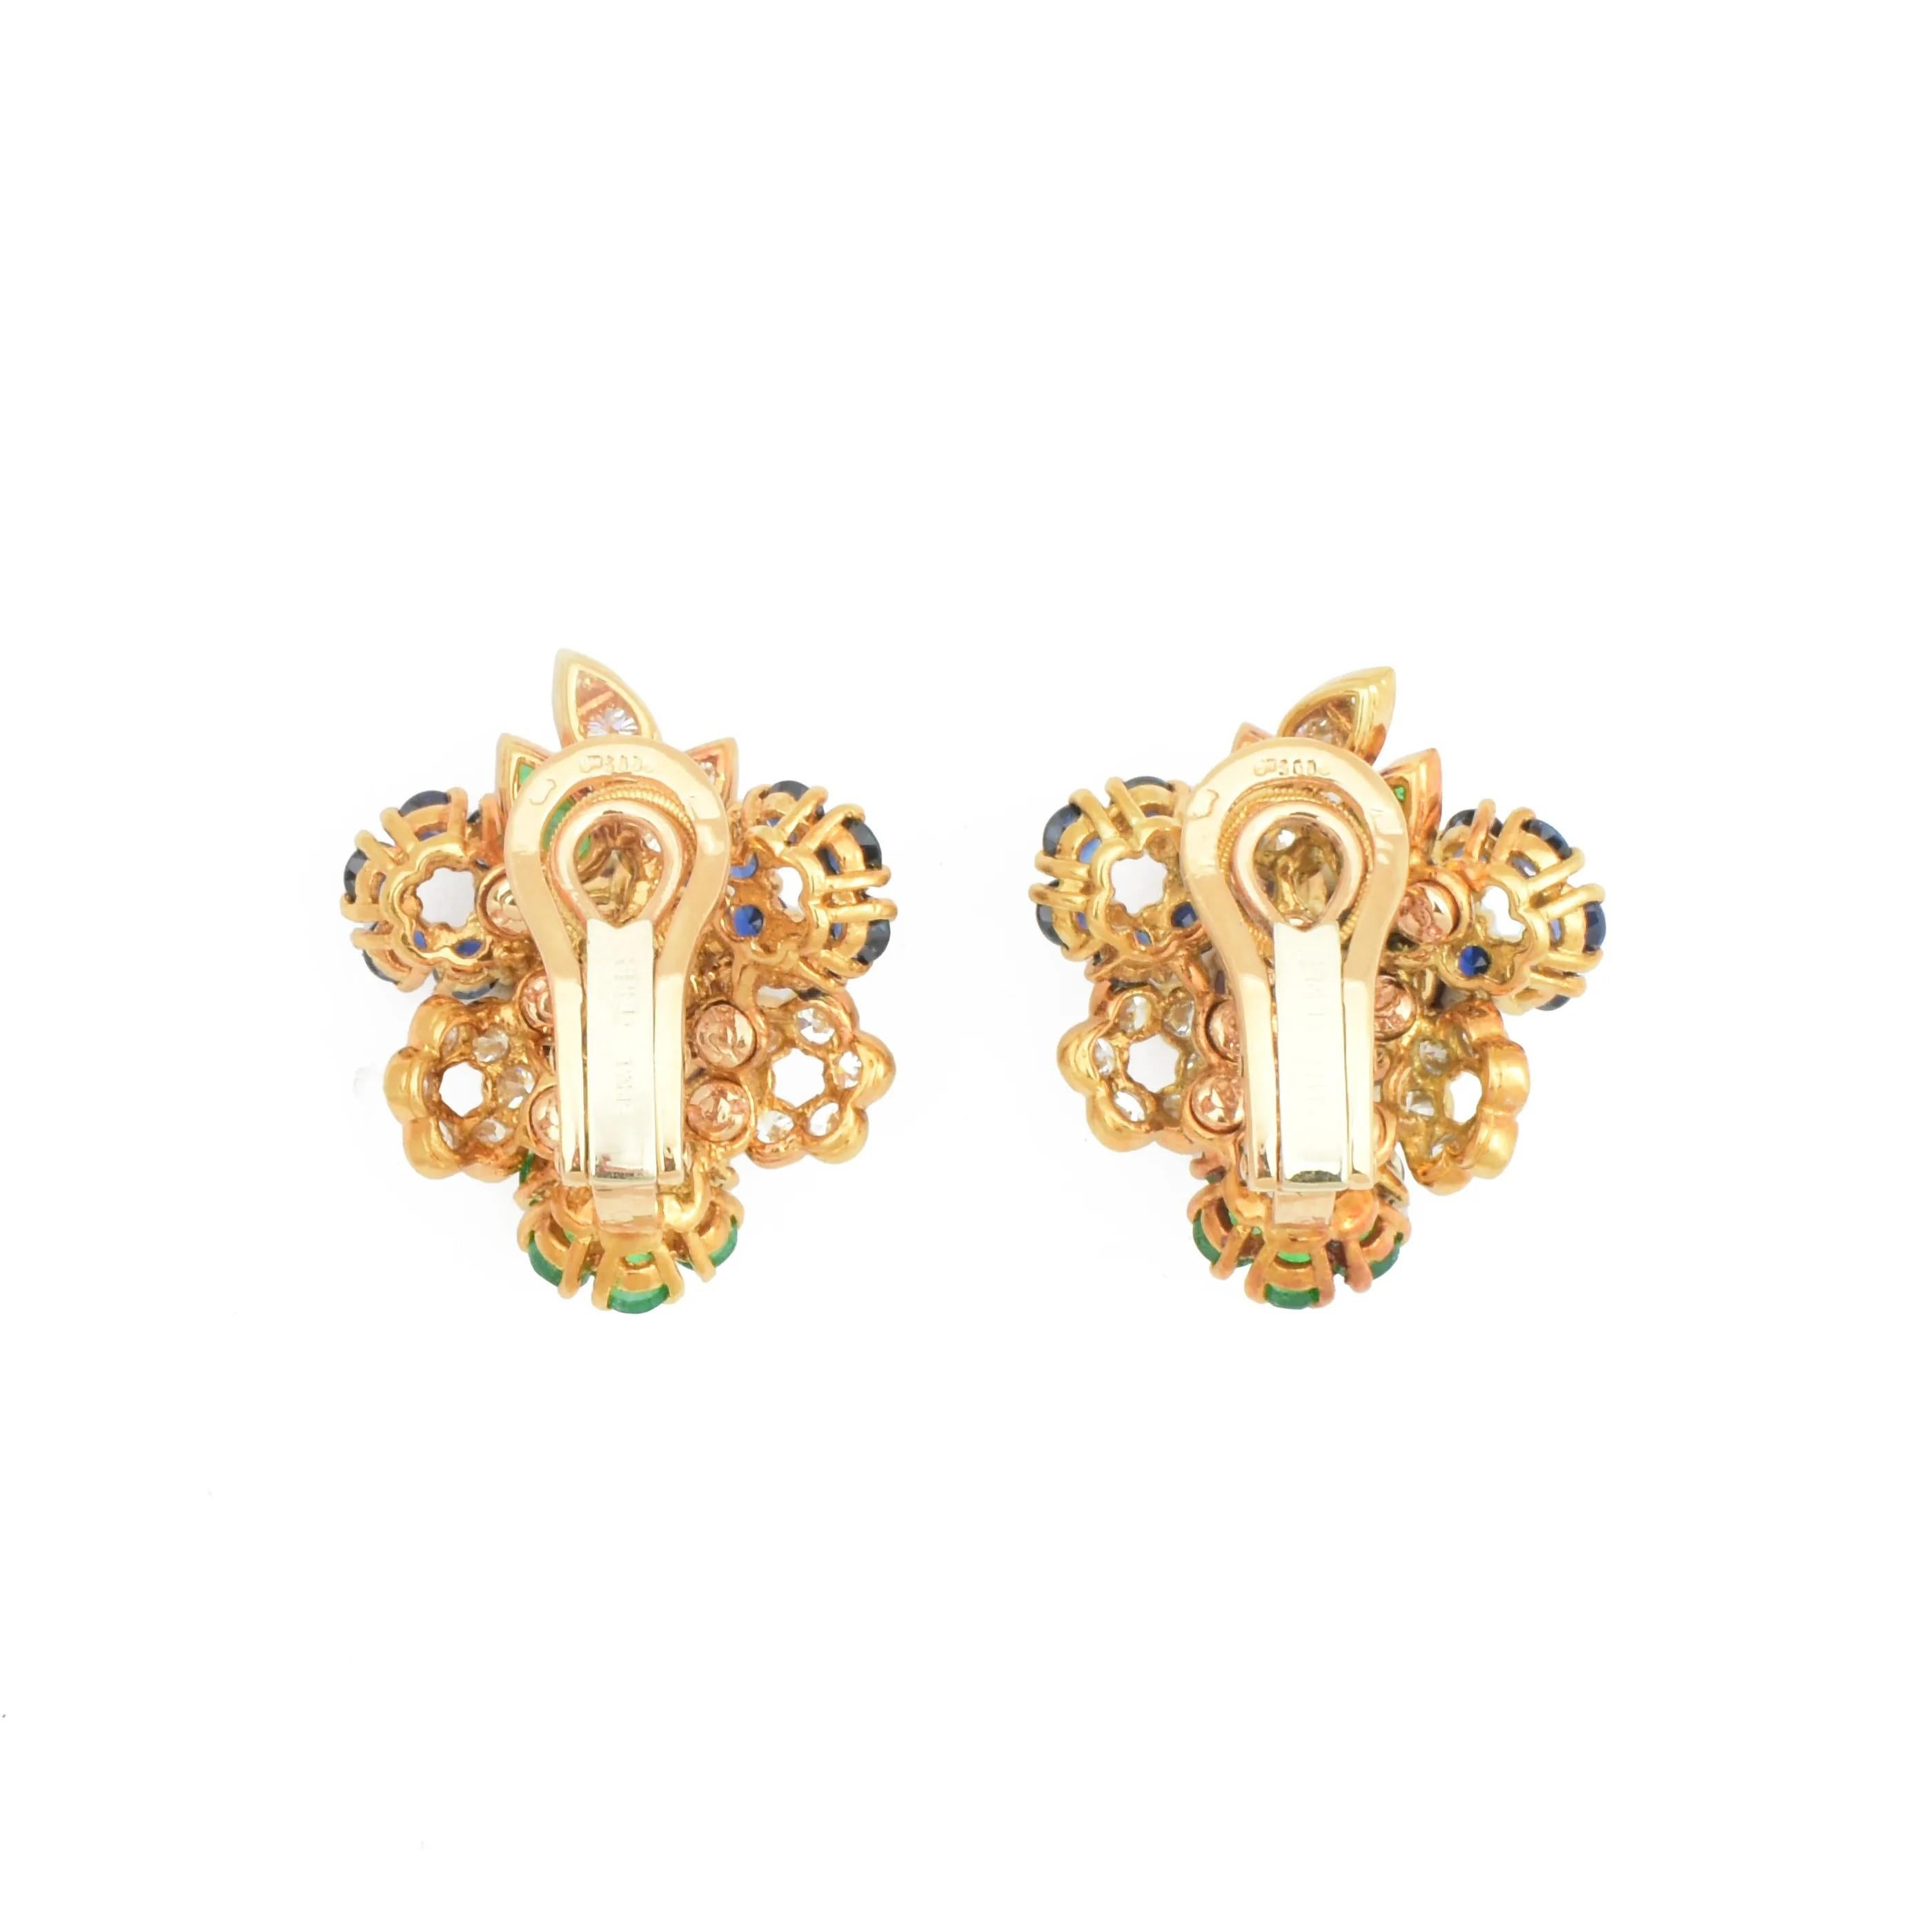 A stunning pair of colourful clip earring by Fred of Paris circa 1970.

Modelled in 18k yellow gold designed as stylised bouquets.

Set with fine natural rubies, sapphires, emeralds and diamonds complete with original case. Fabulous